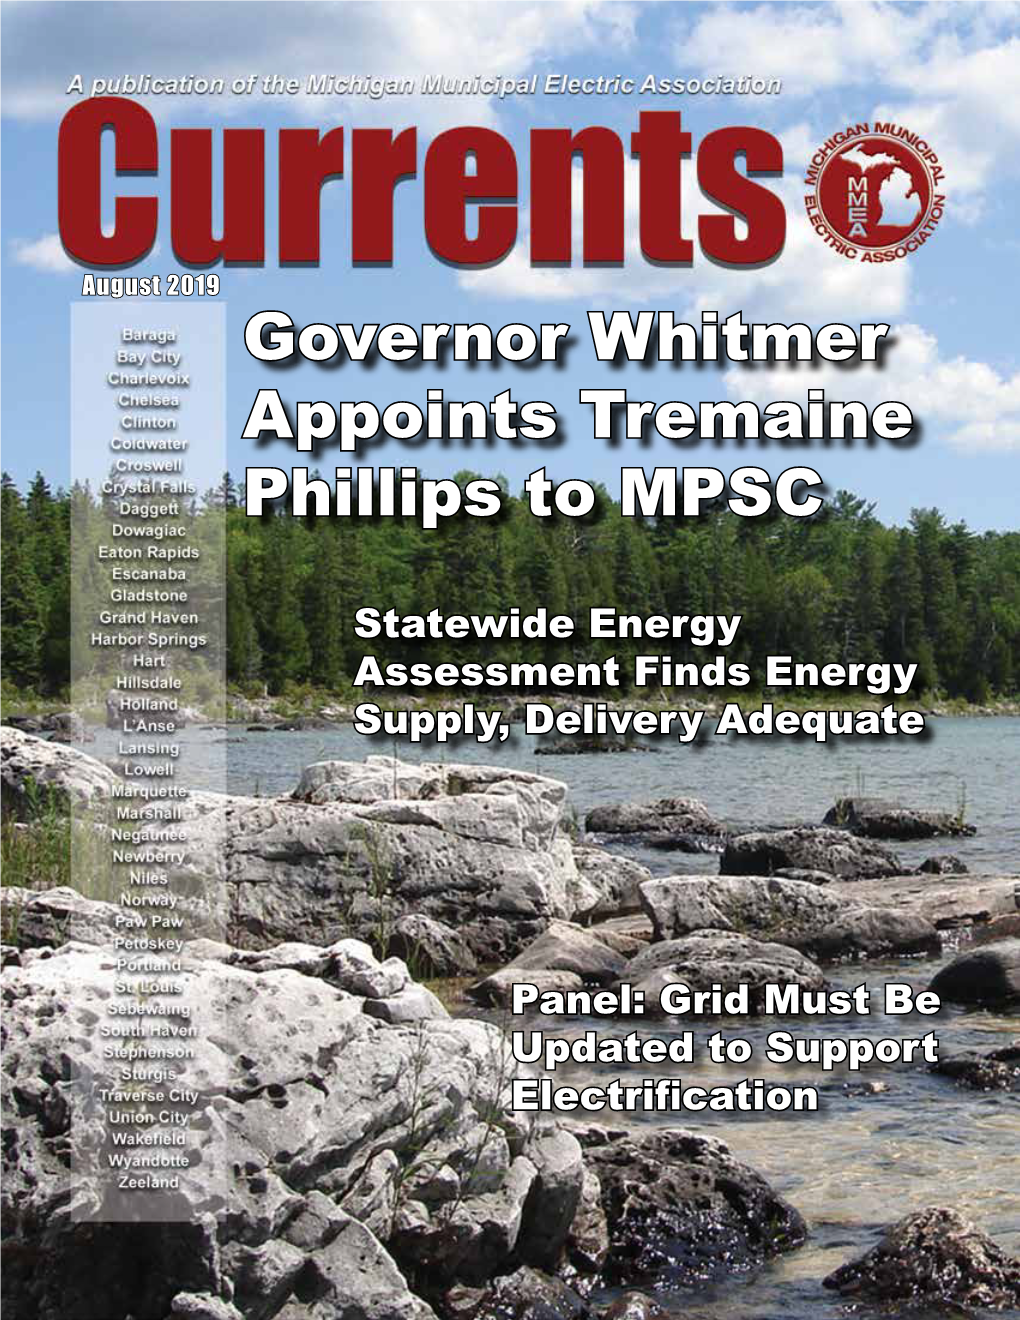 Governor Whitmer Appoints Tremaine Phillips to MPSC